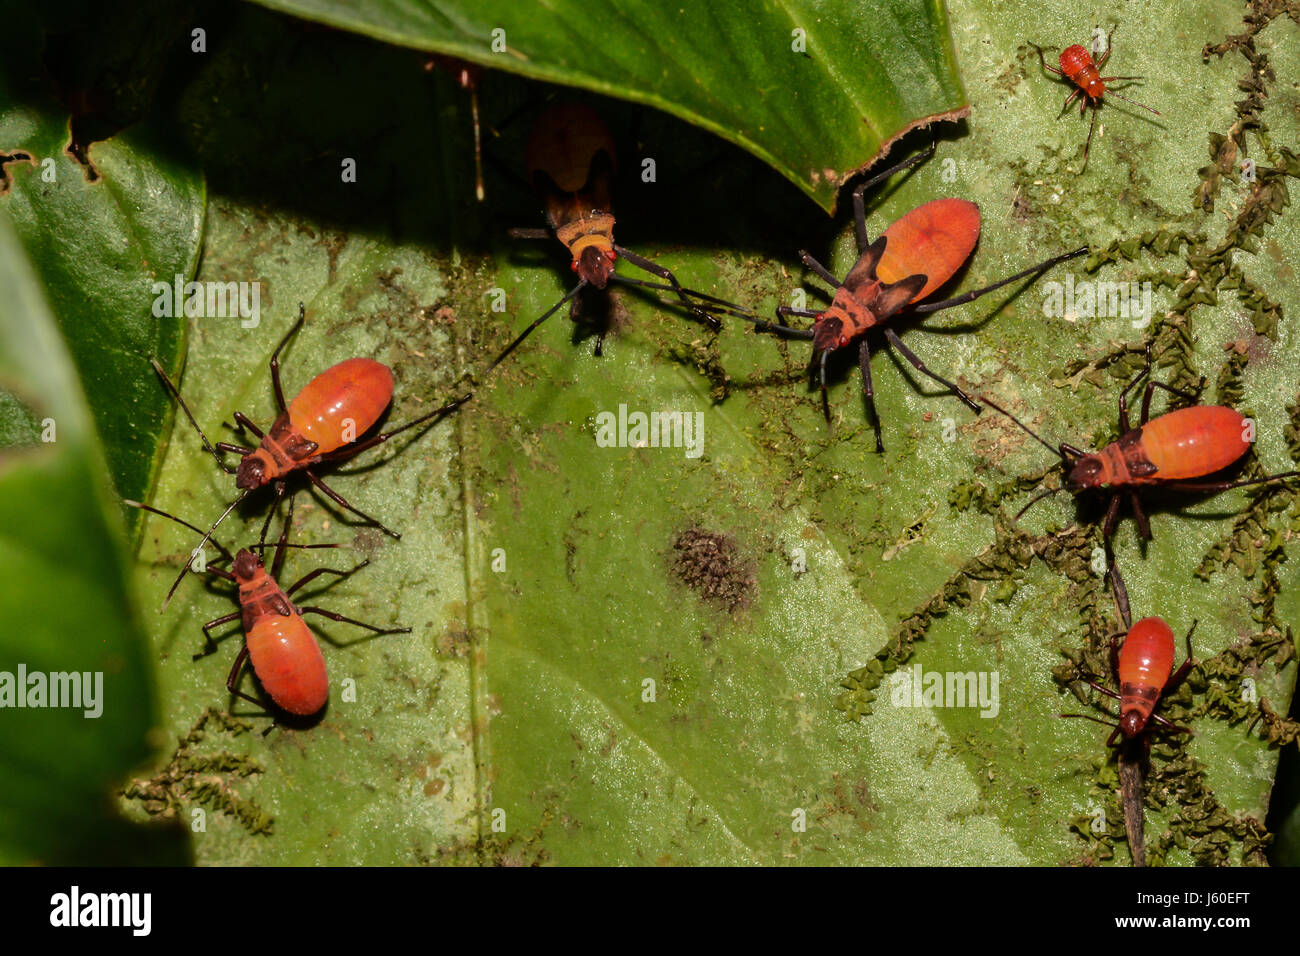 Cotton Stainer bugs feeding off a tree in the Rainforest in Costa Rica Stock Photo